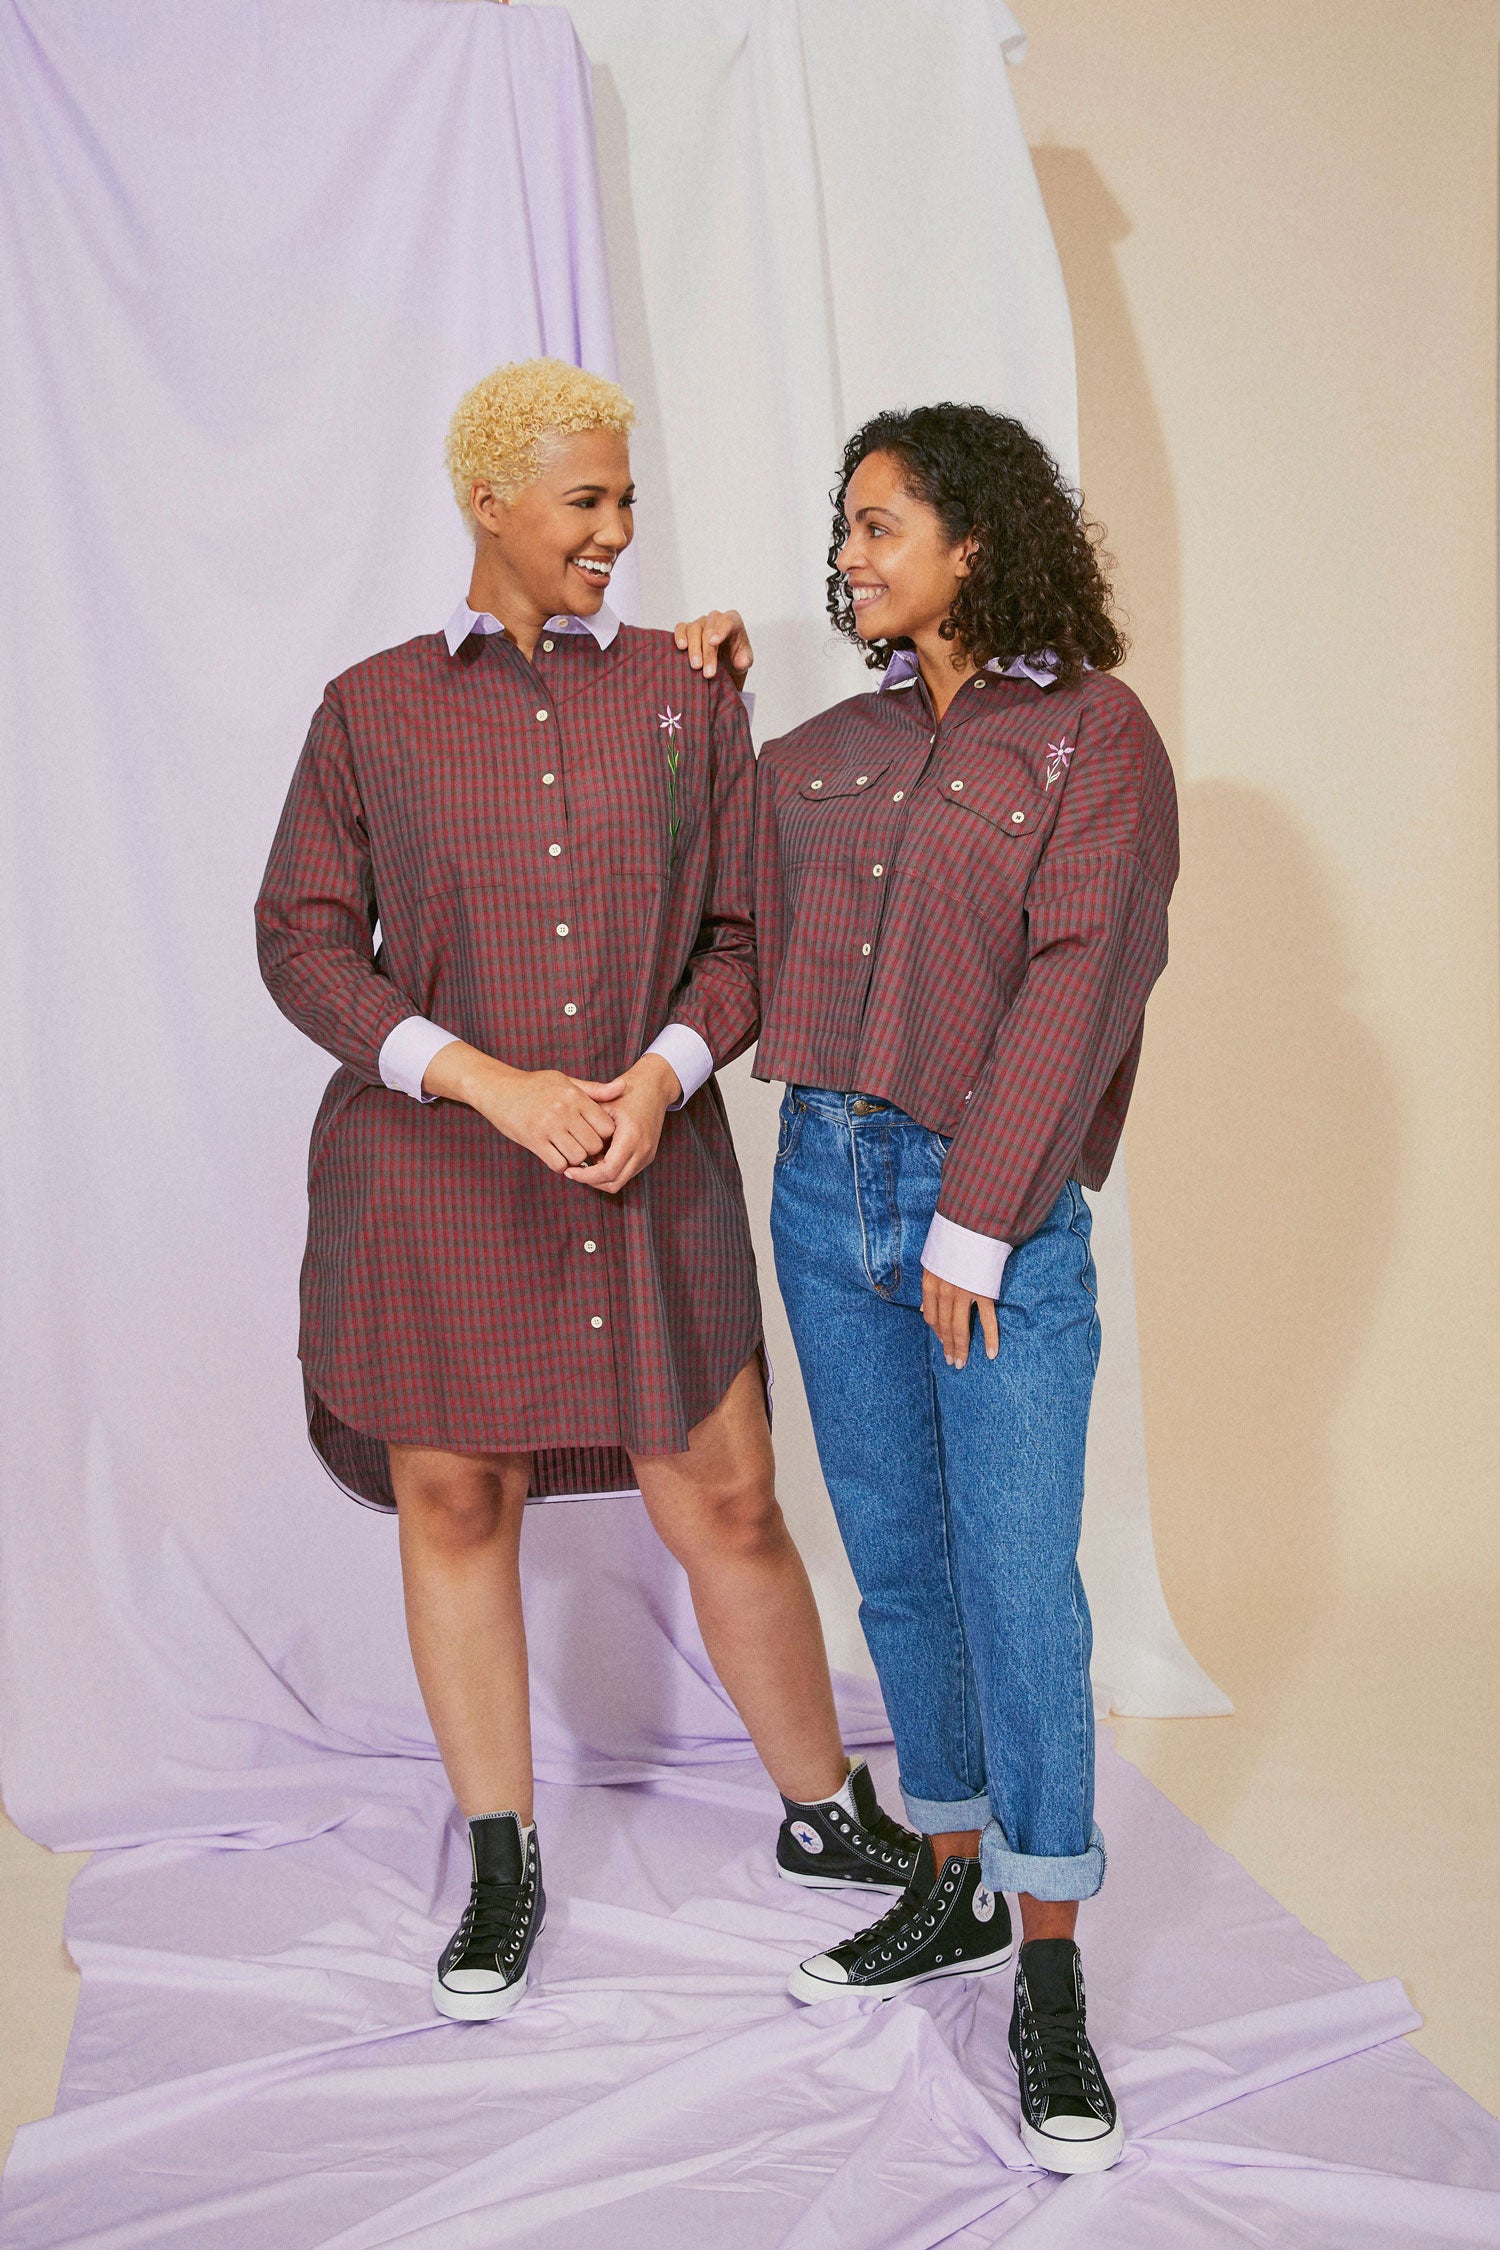 Women's Shirtdress, Saywood Studio, Etta Shirtdress, Red Check, two models stand together smiling. 2nd model wears the red check utility Jules Shirt